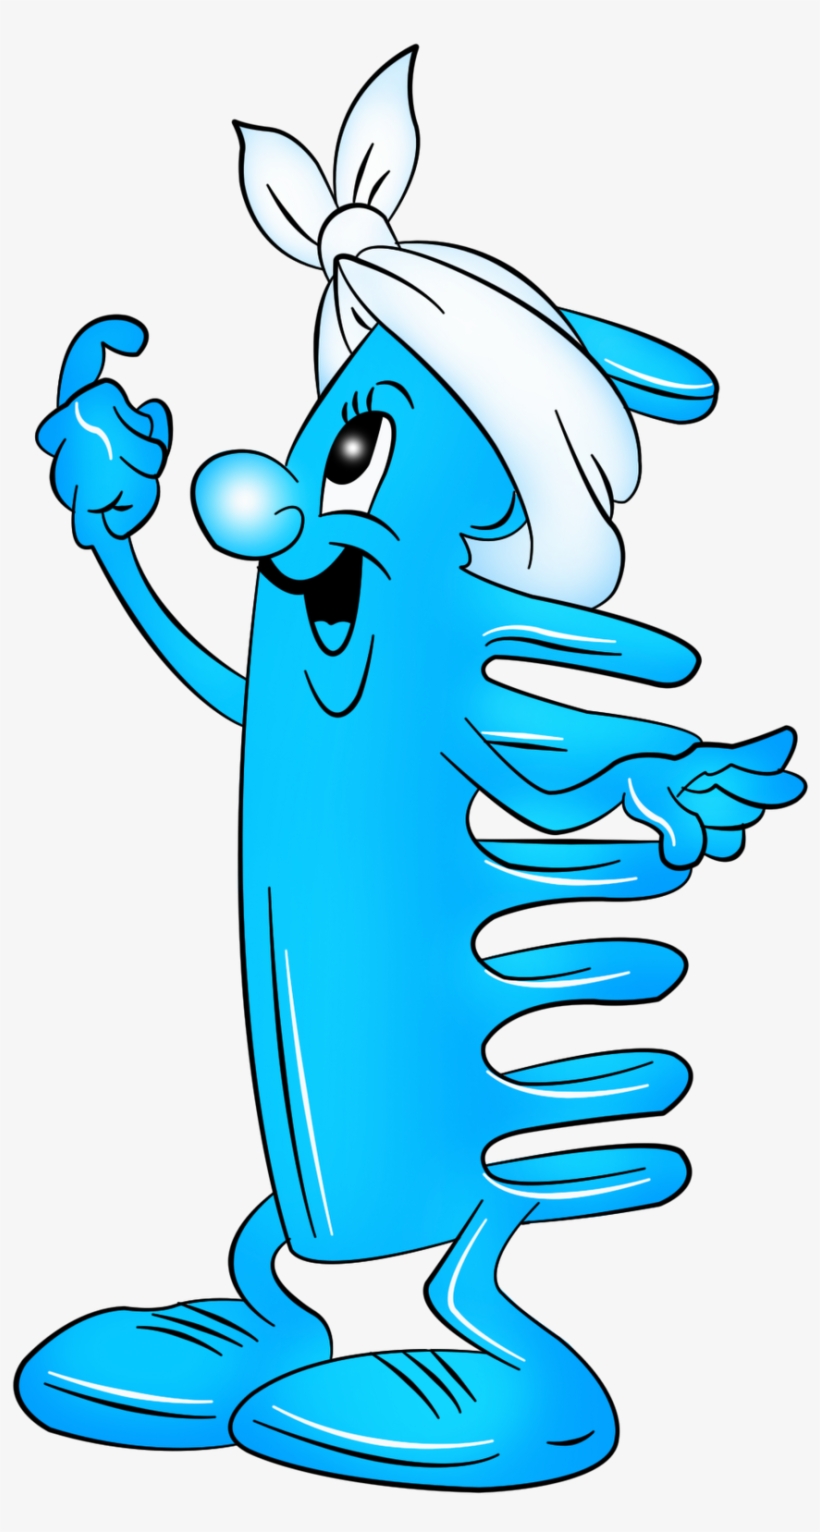 You Might Also Like - Implementos De Aseo Animados, transparent png #4147484